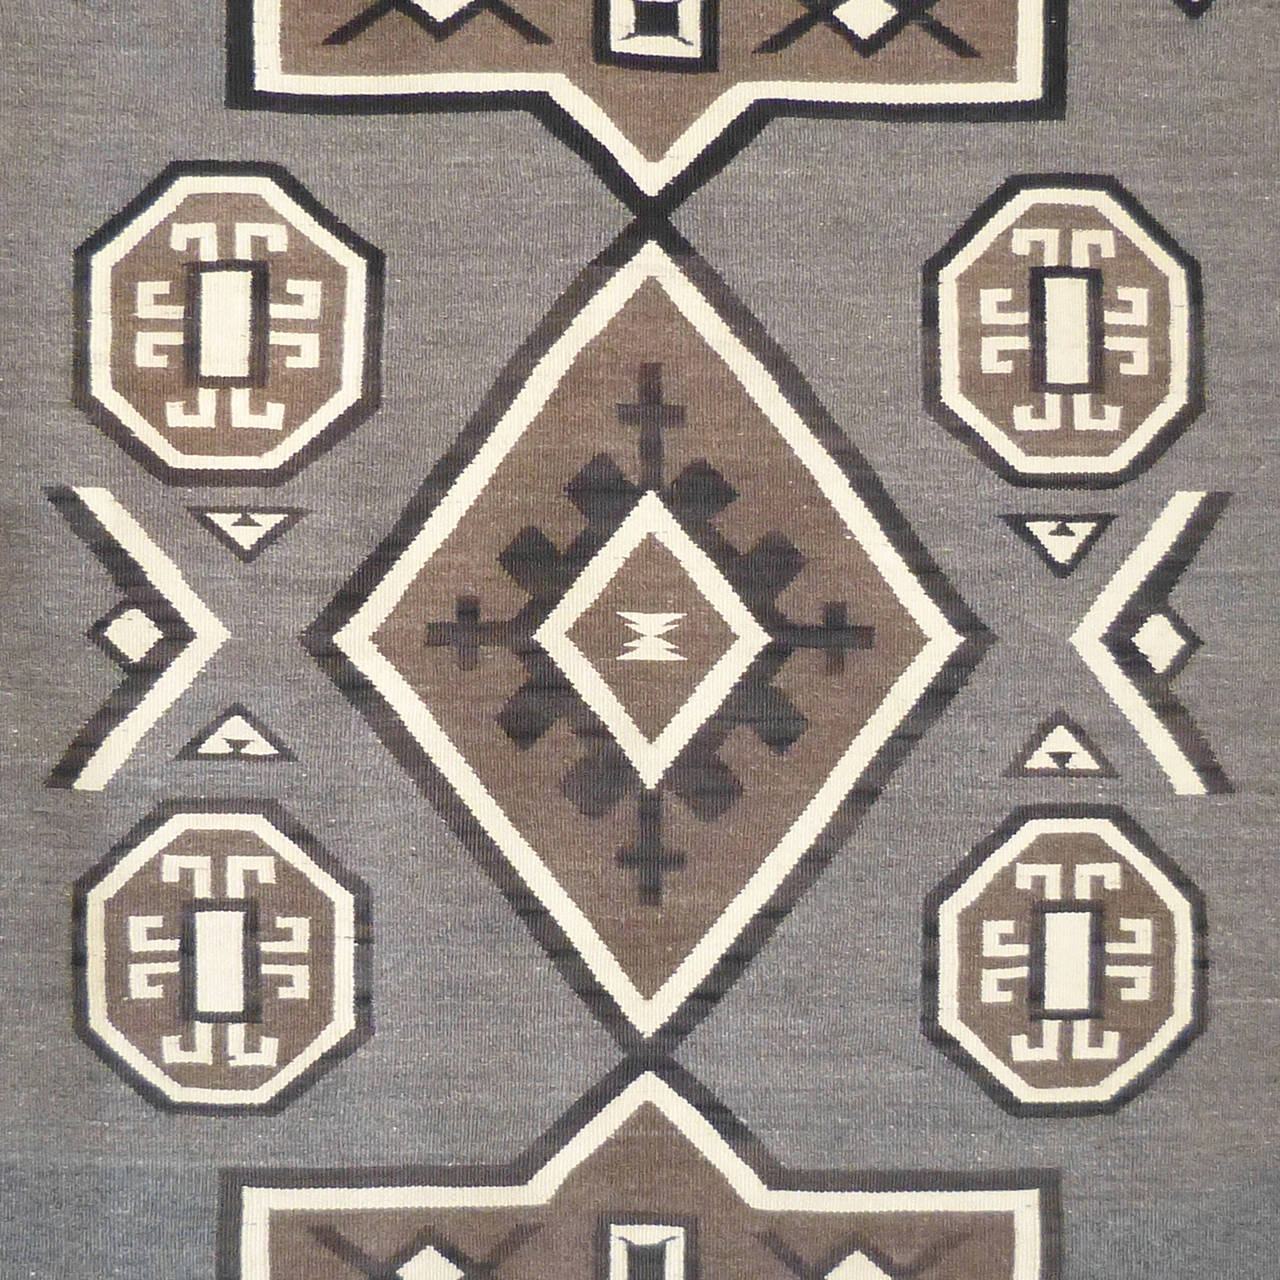 Handwoven by an unknown Navajo weaver in the beginning part of the 20th century, this rug was originally produced for the mail order catalog of the Crystal Trading Post in New Mexico. The owner, J.B. Moore worked directly with Navajo weavers to